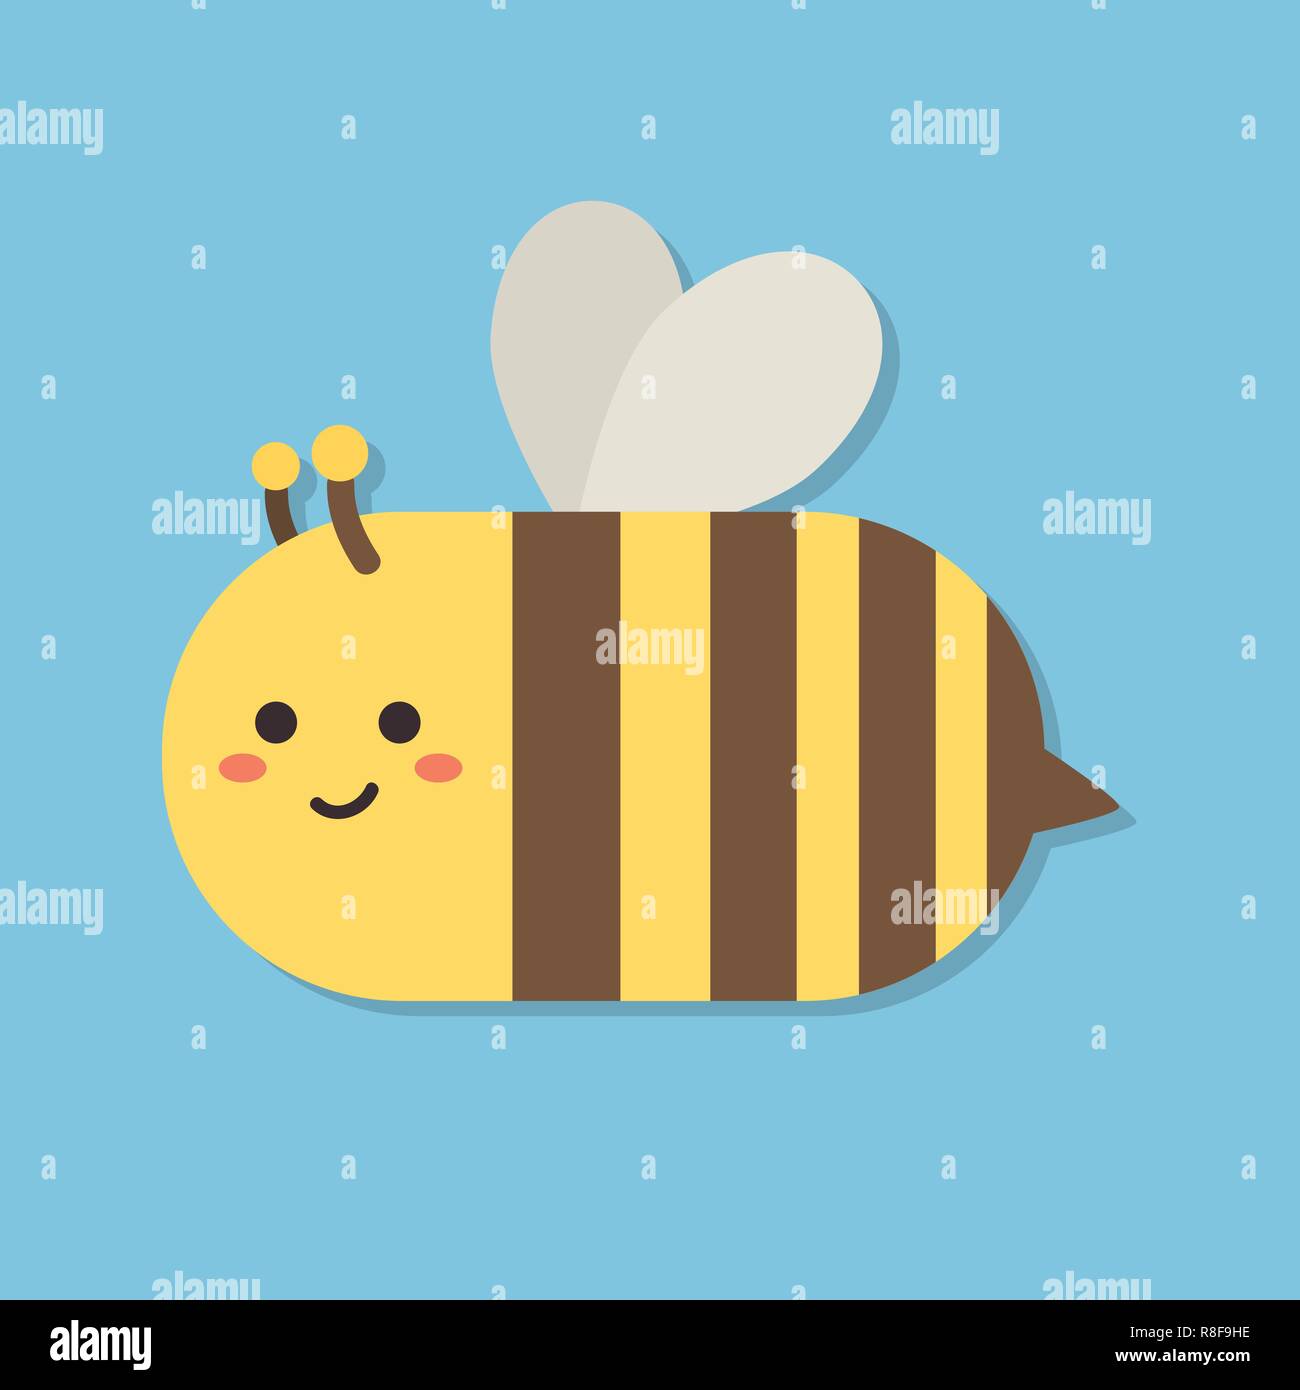 Cute Bee Cartoon Flying isolated on Blue Background Vector Illustration Stock Vector